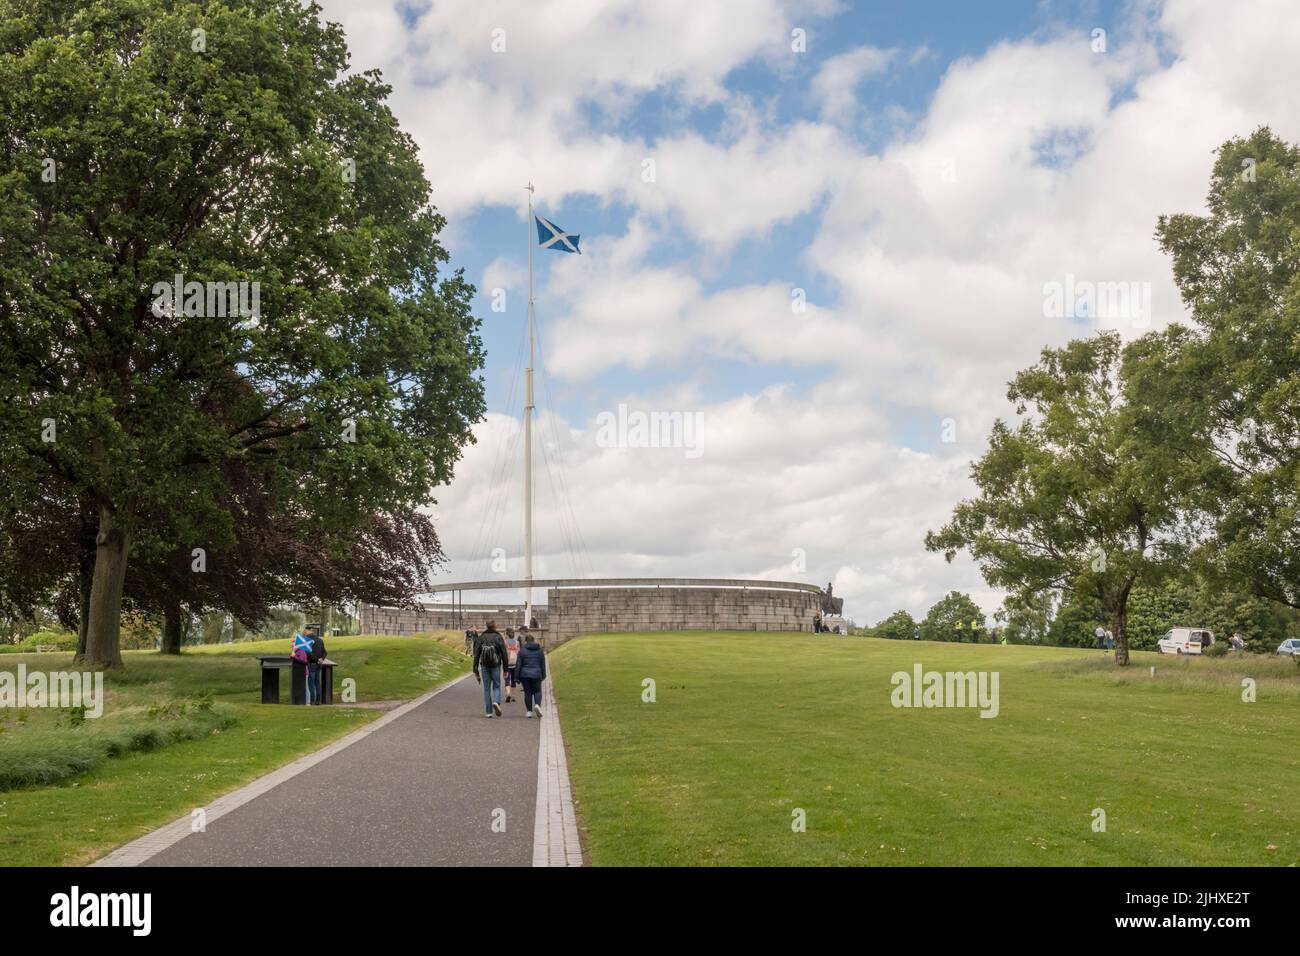 The Scottish flag flying over the monument at the site of the Battle of Bannockburn outside Stirling, Scotland. Stock Photo